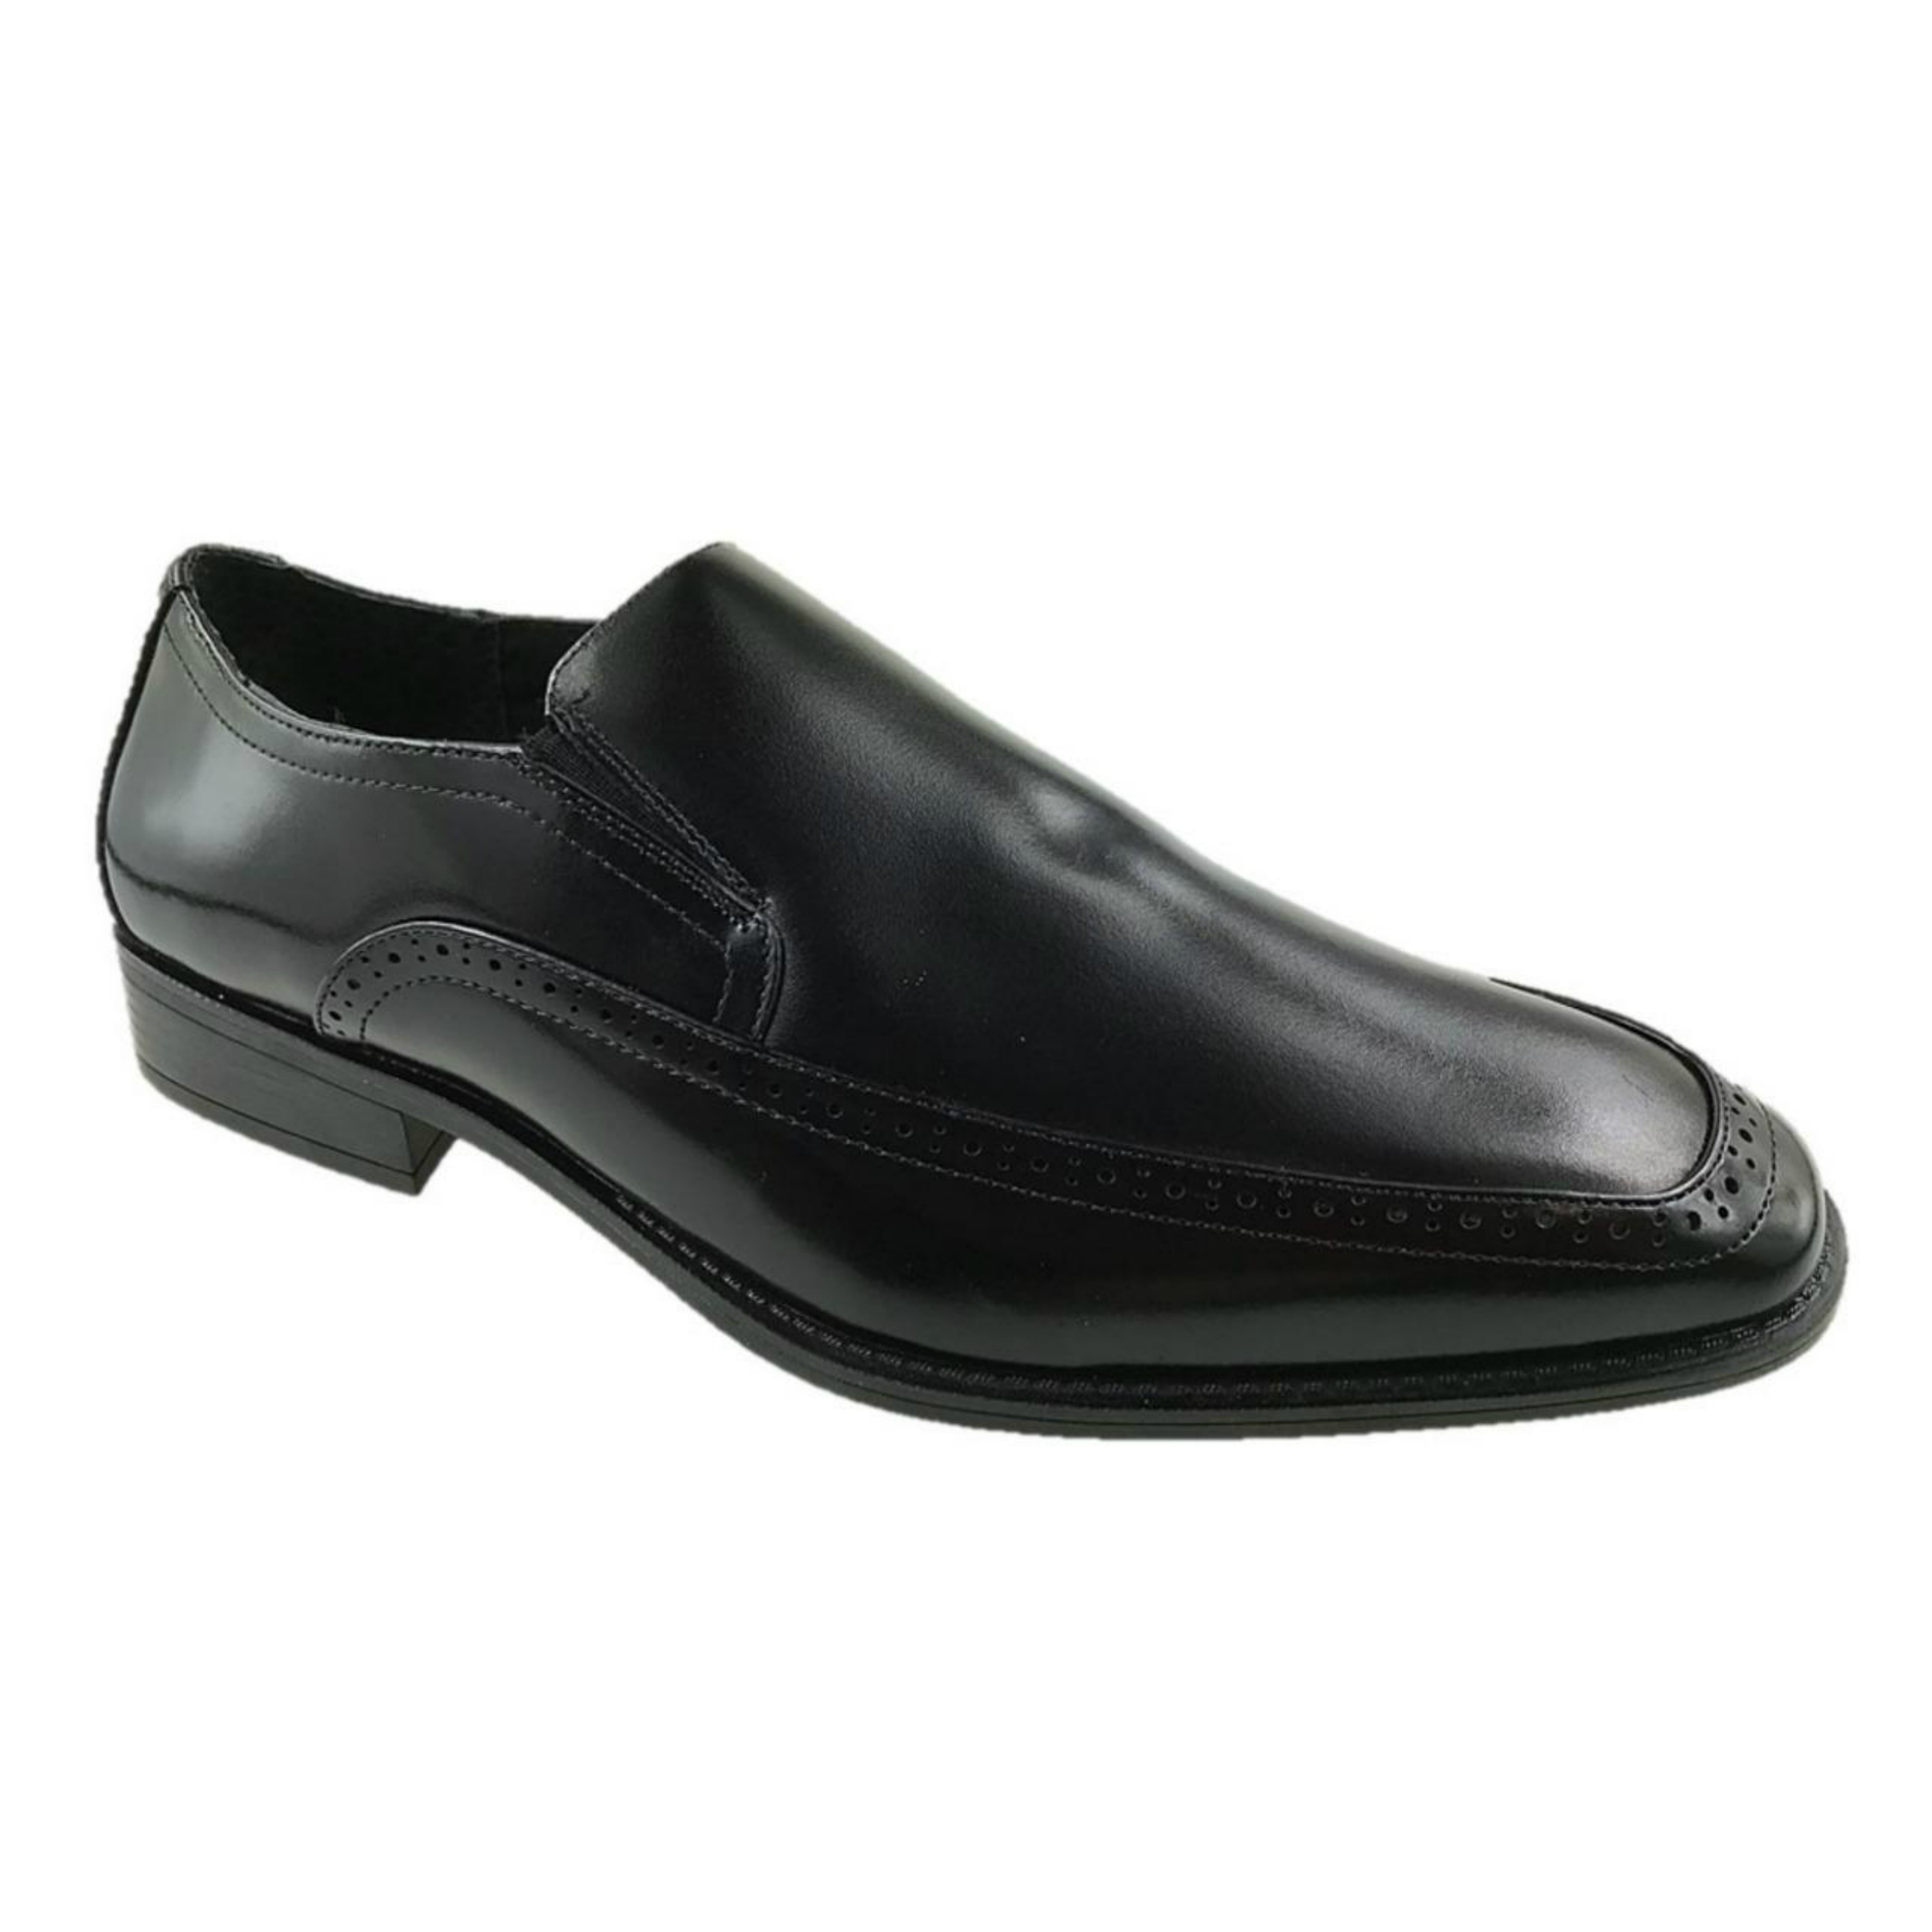 12 size formal shoes